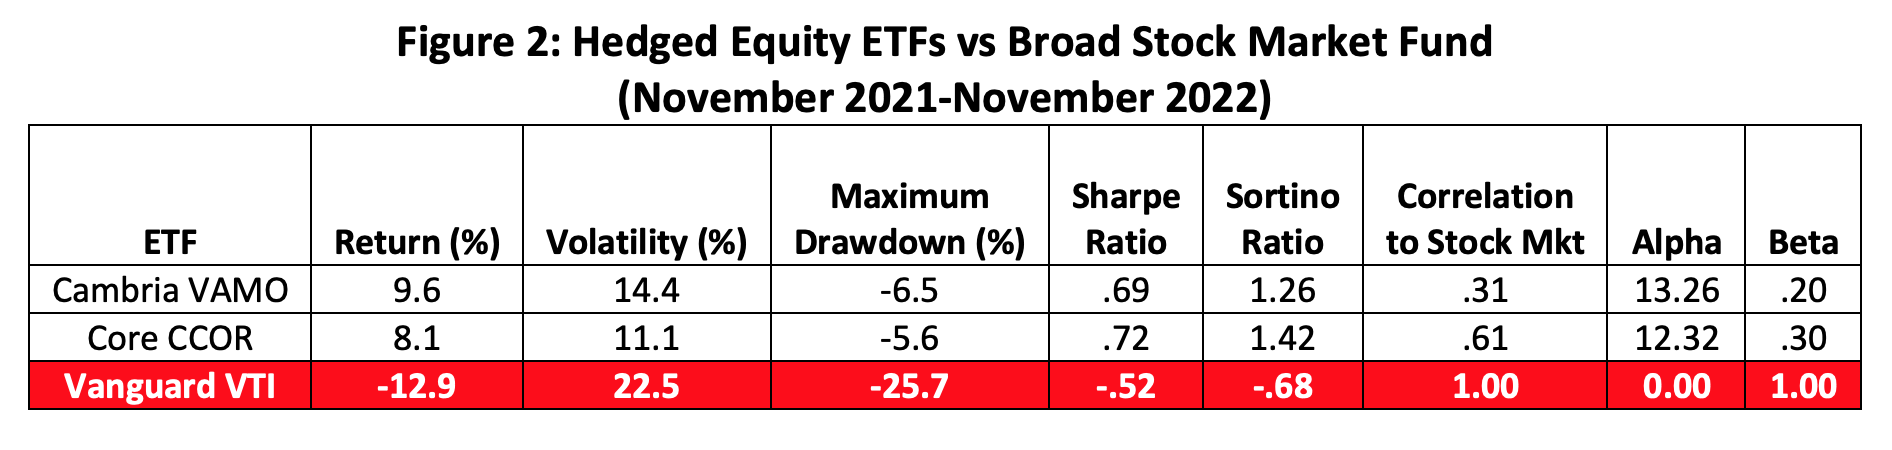 hedged-etfs-table.png